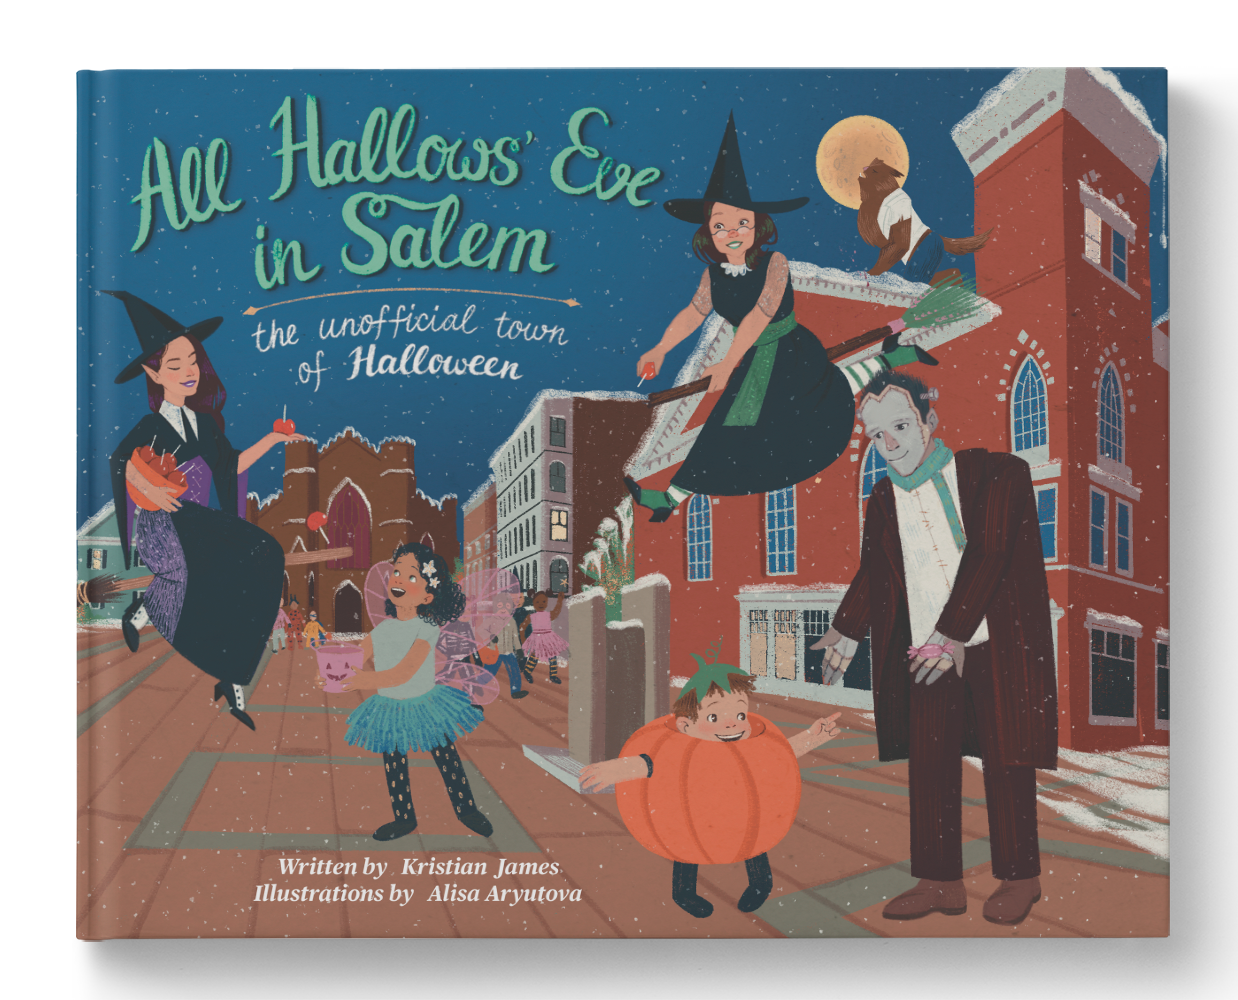 All Hallow's Eve in Salem